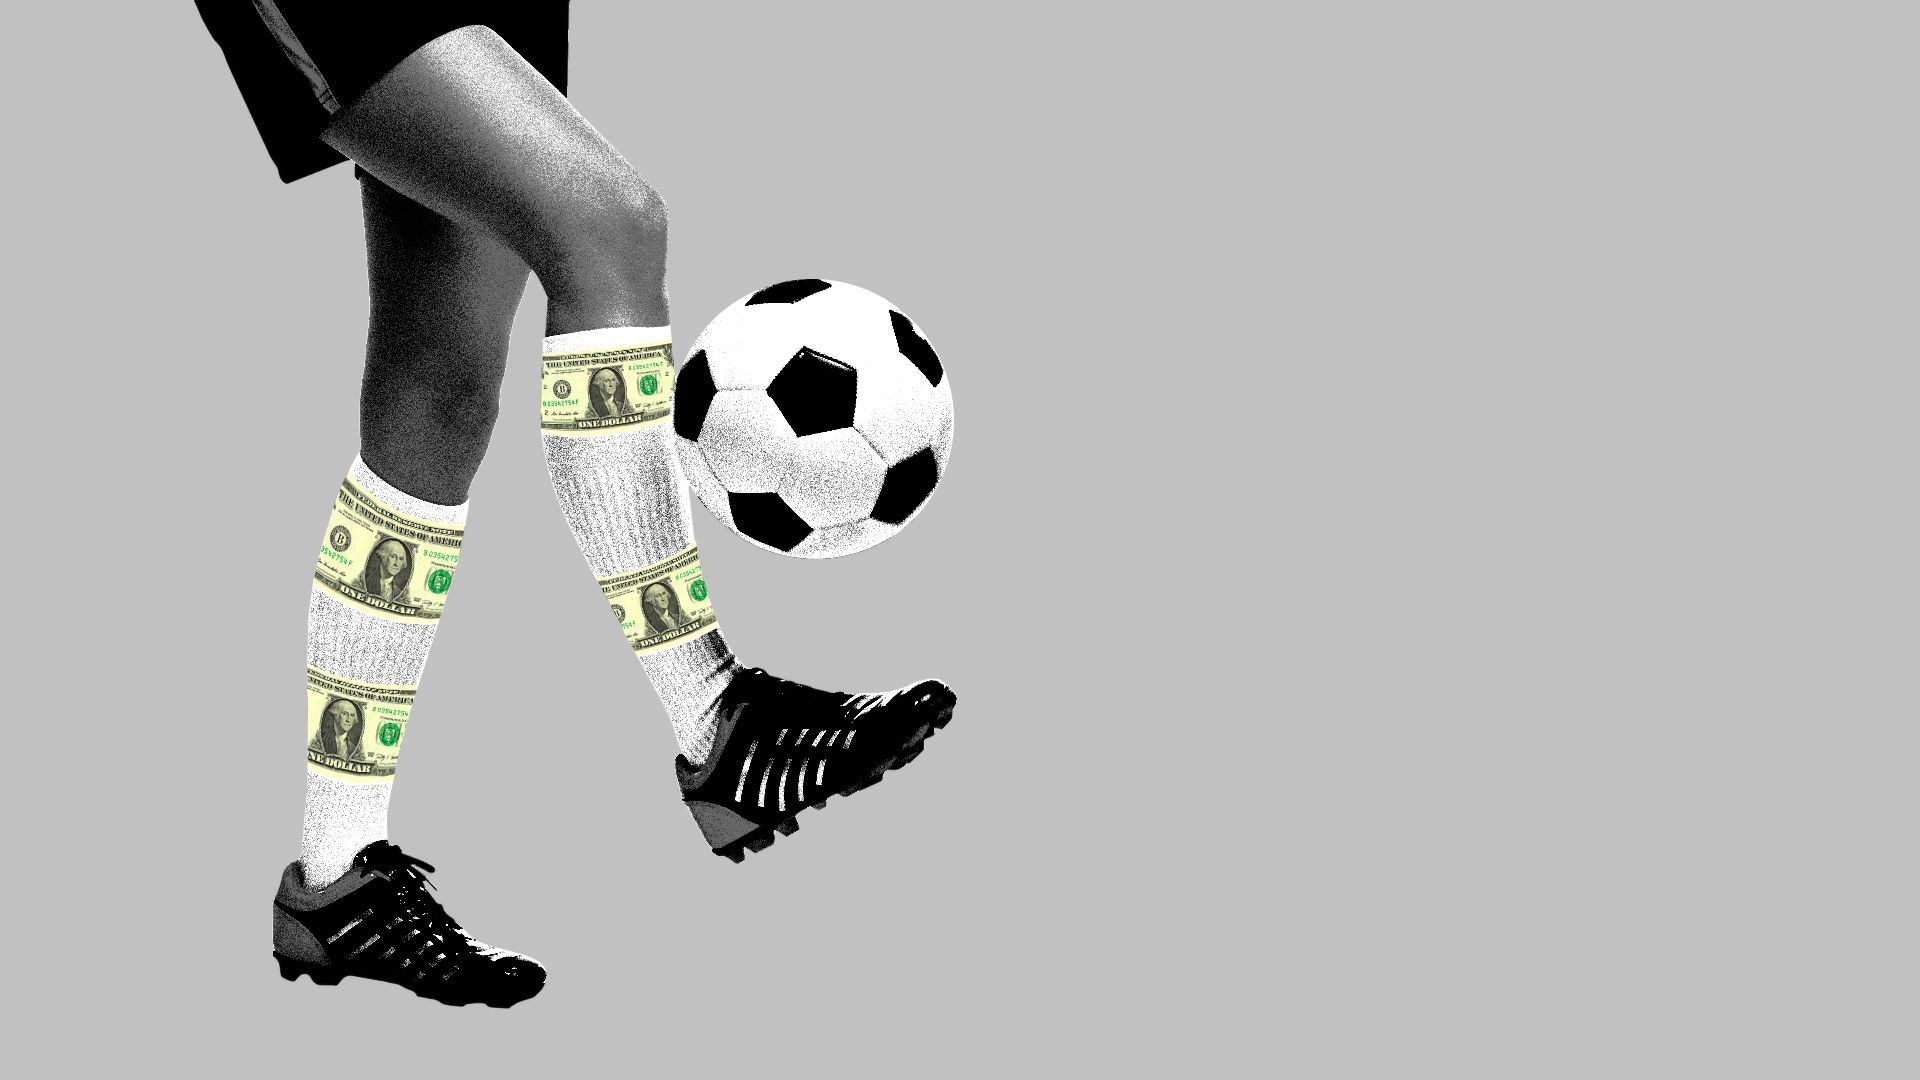 Someone with money socks kicking a soccer ball